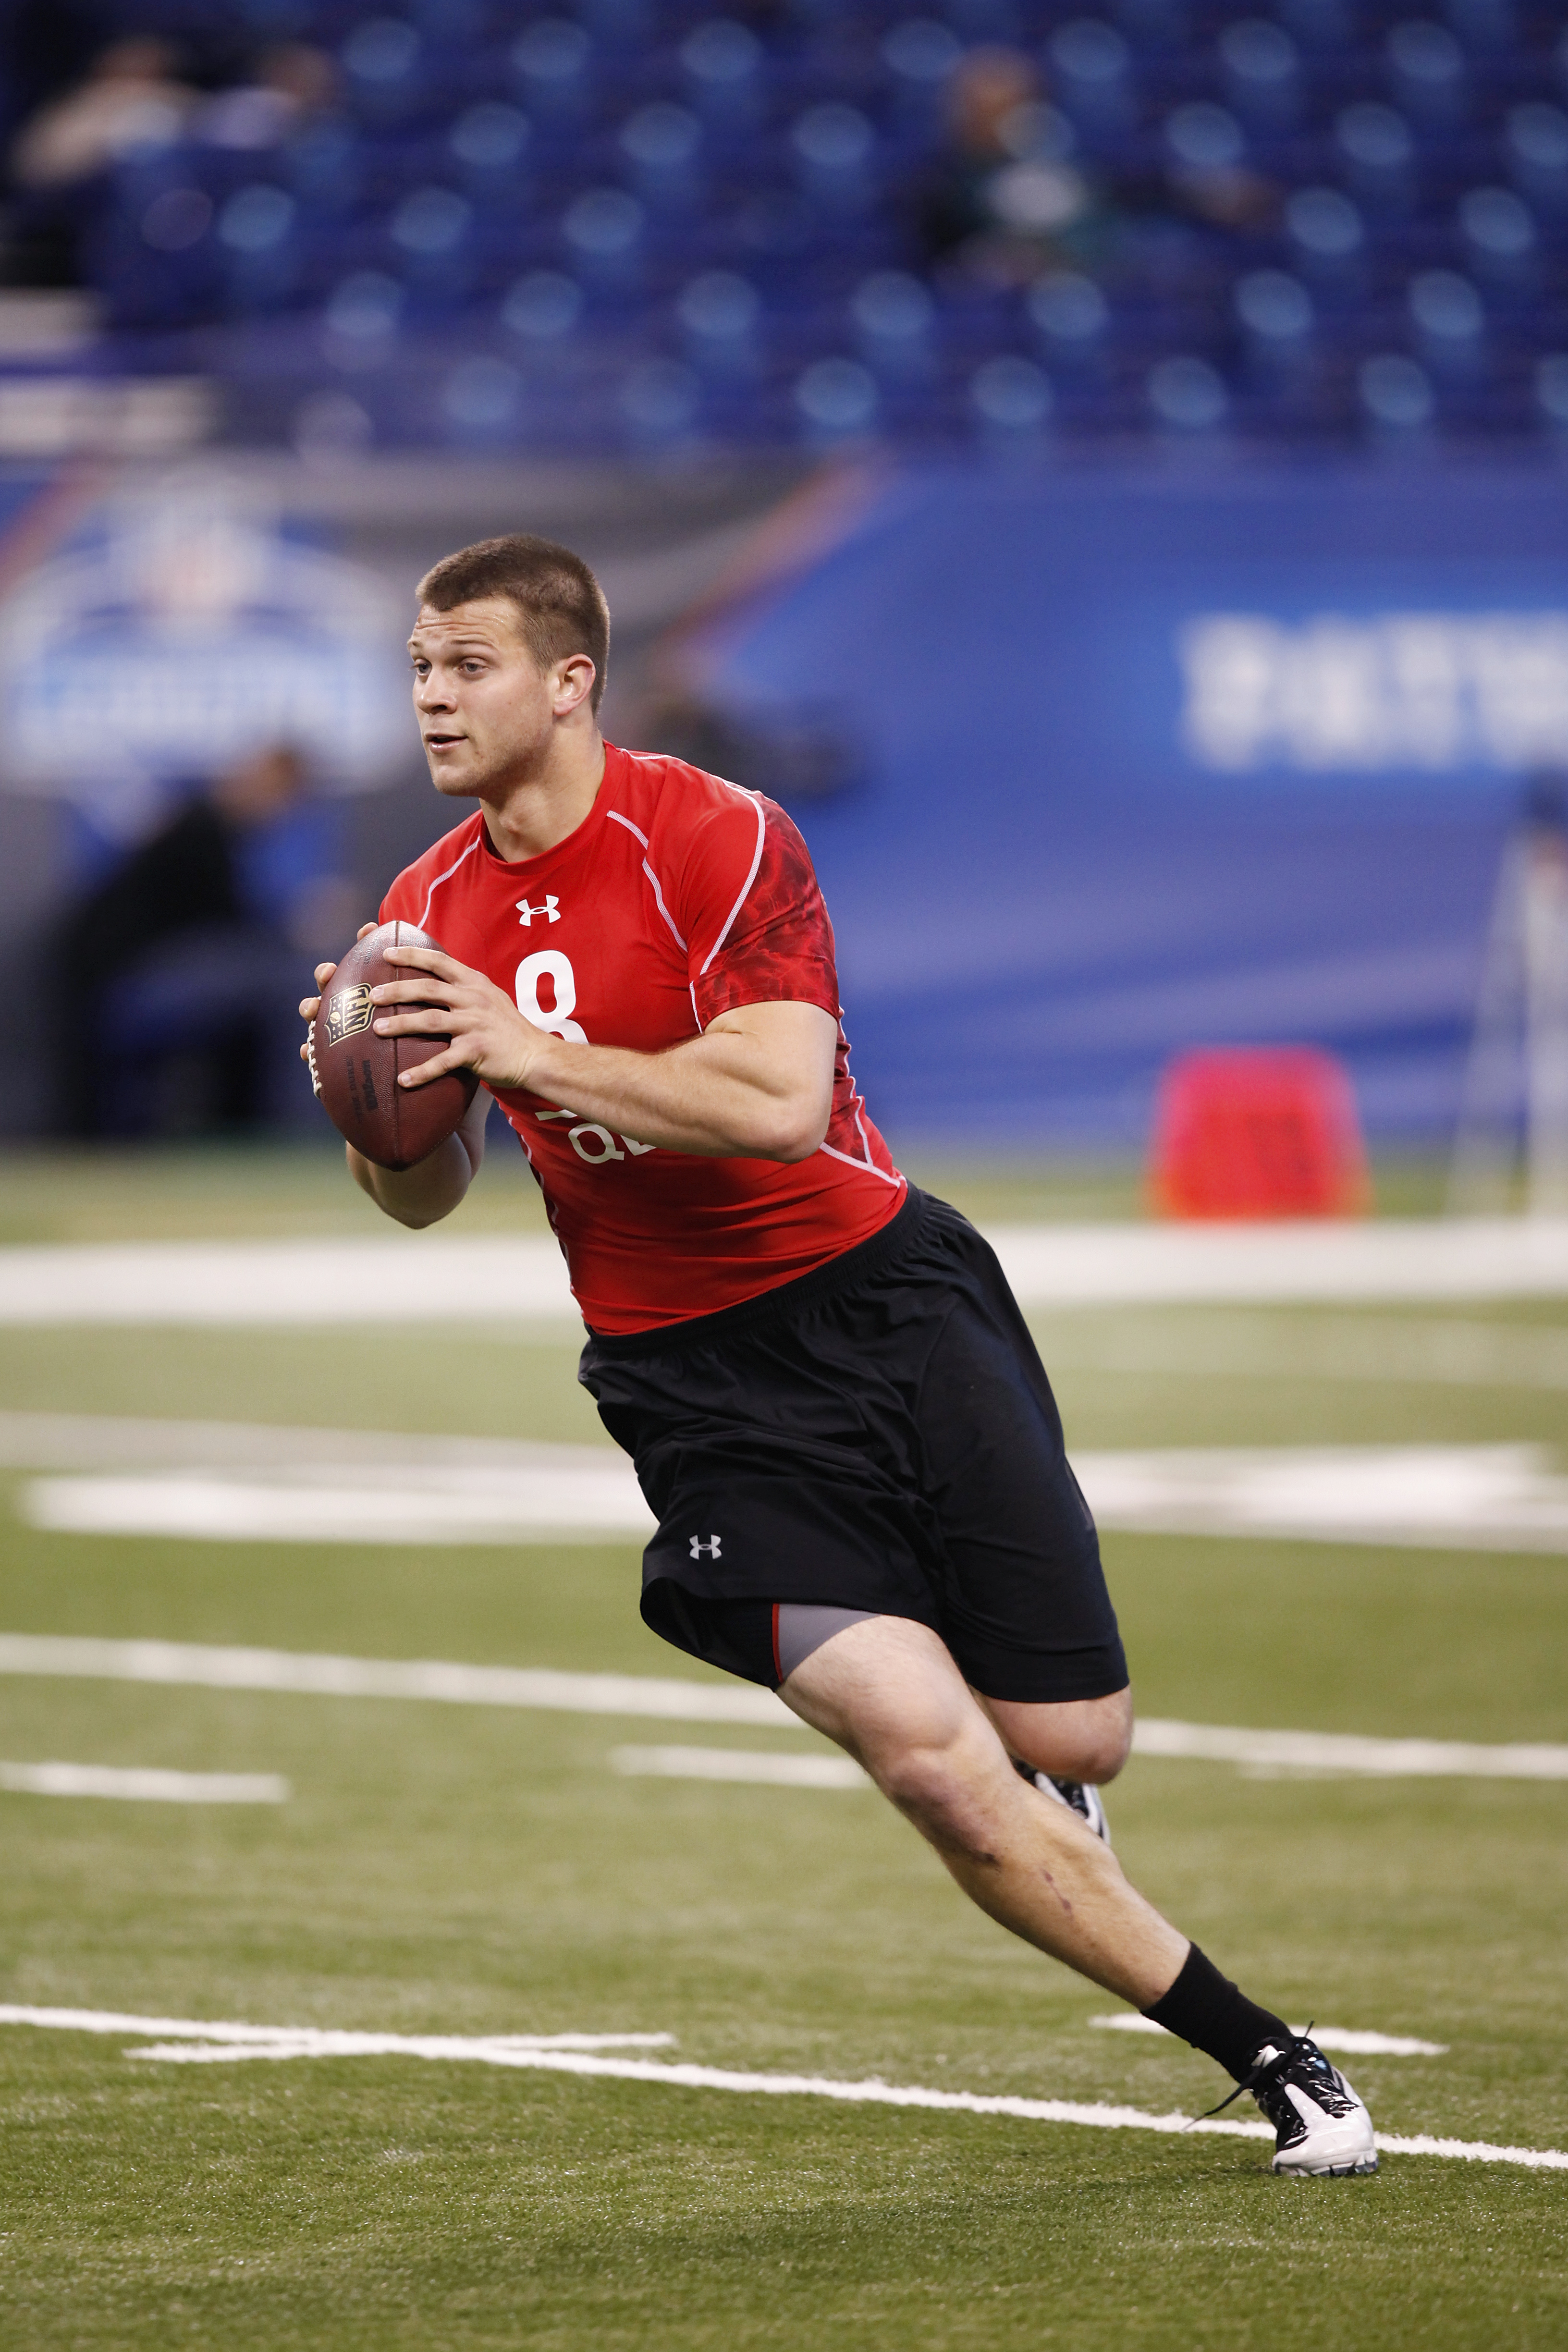 INDIANAPOLIS, IN - FEBRUARY 27:  Quarterback Jake Locker of Washington runs a passing drill during the 2011 NFL Scouting Combine at Lucas Oil Stadium on February 27, 2011 in Indianapolis, Indiana. (Photo by Joe Robbins/Getty Images)